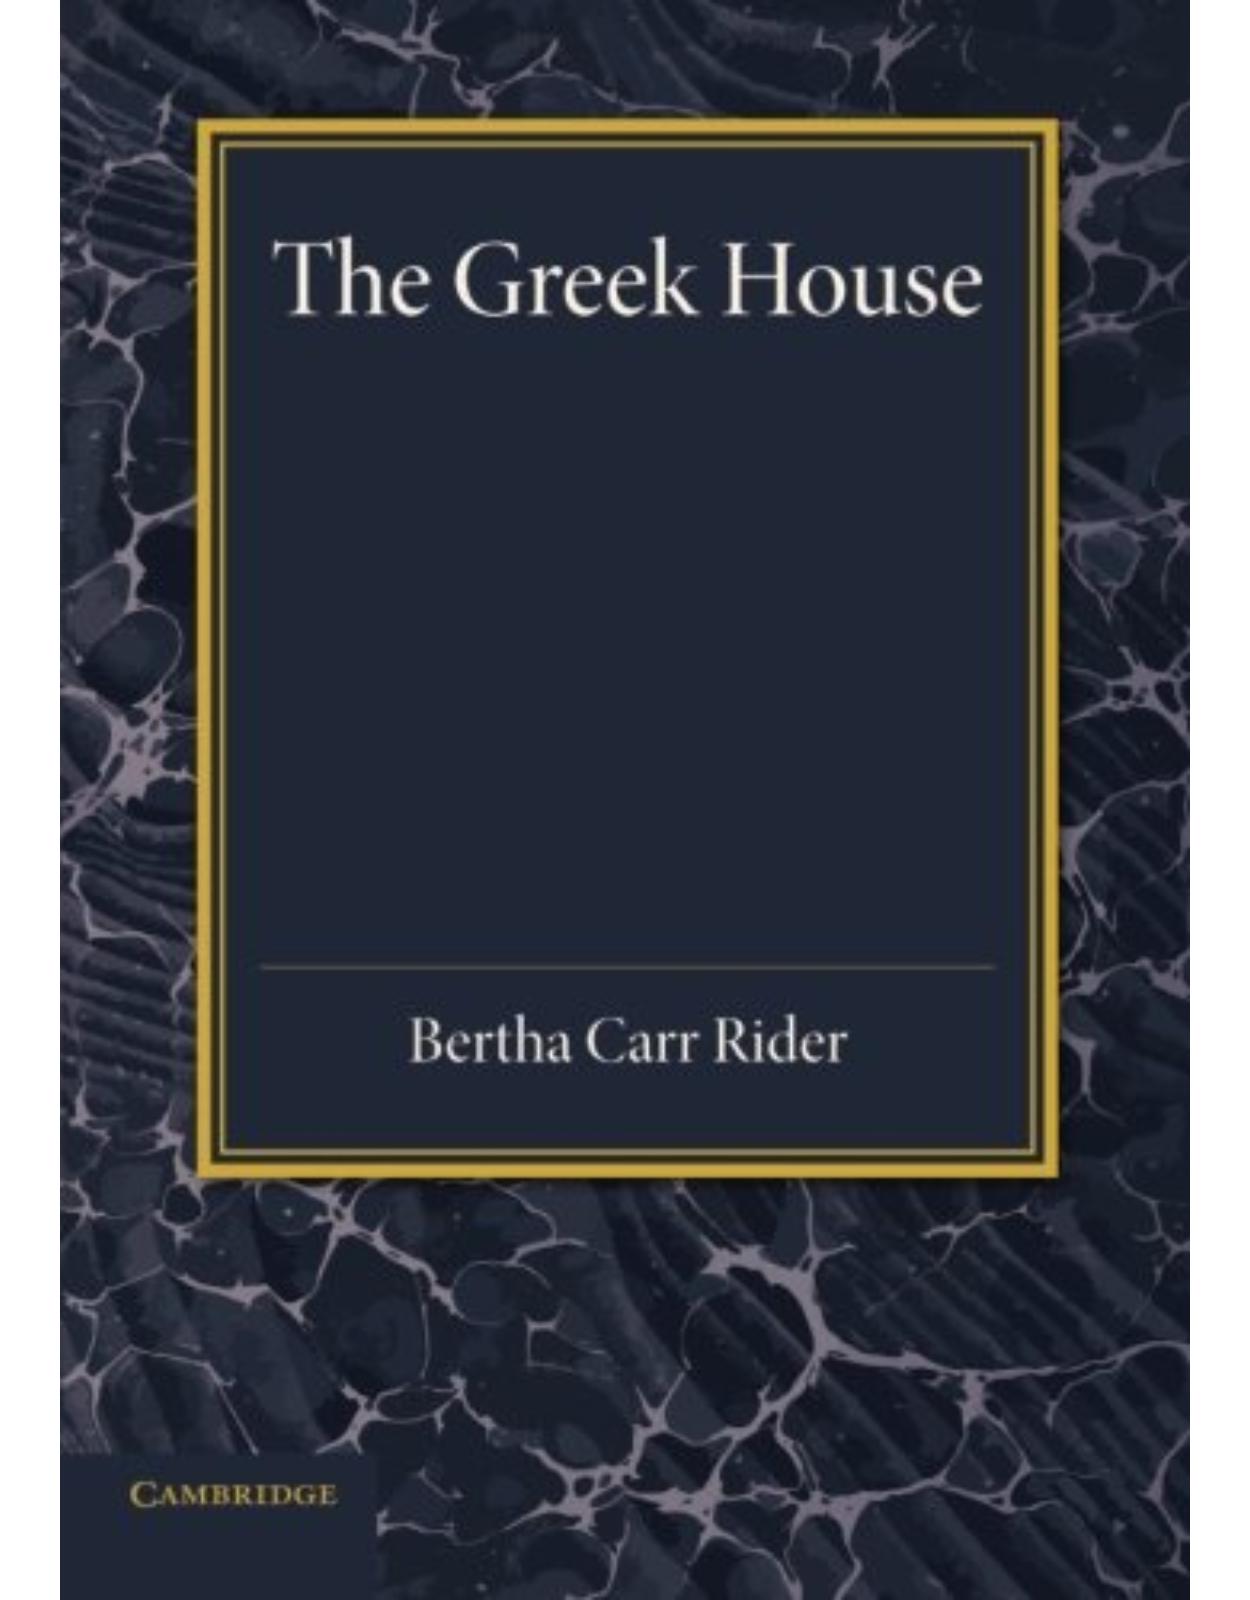 The Greek House: Its History and Development from the Neolithic Period to the Hellenistic Age